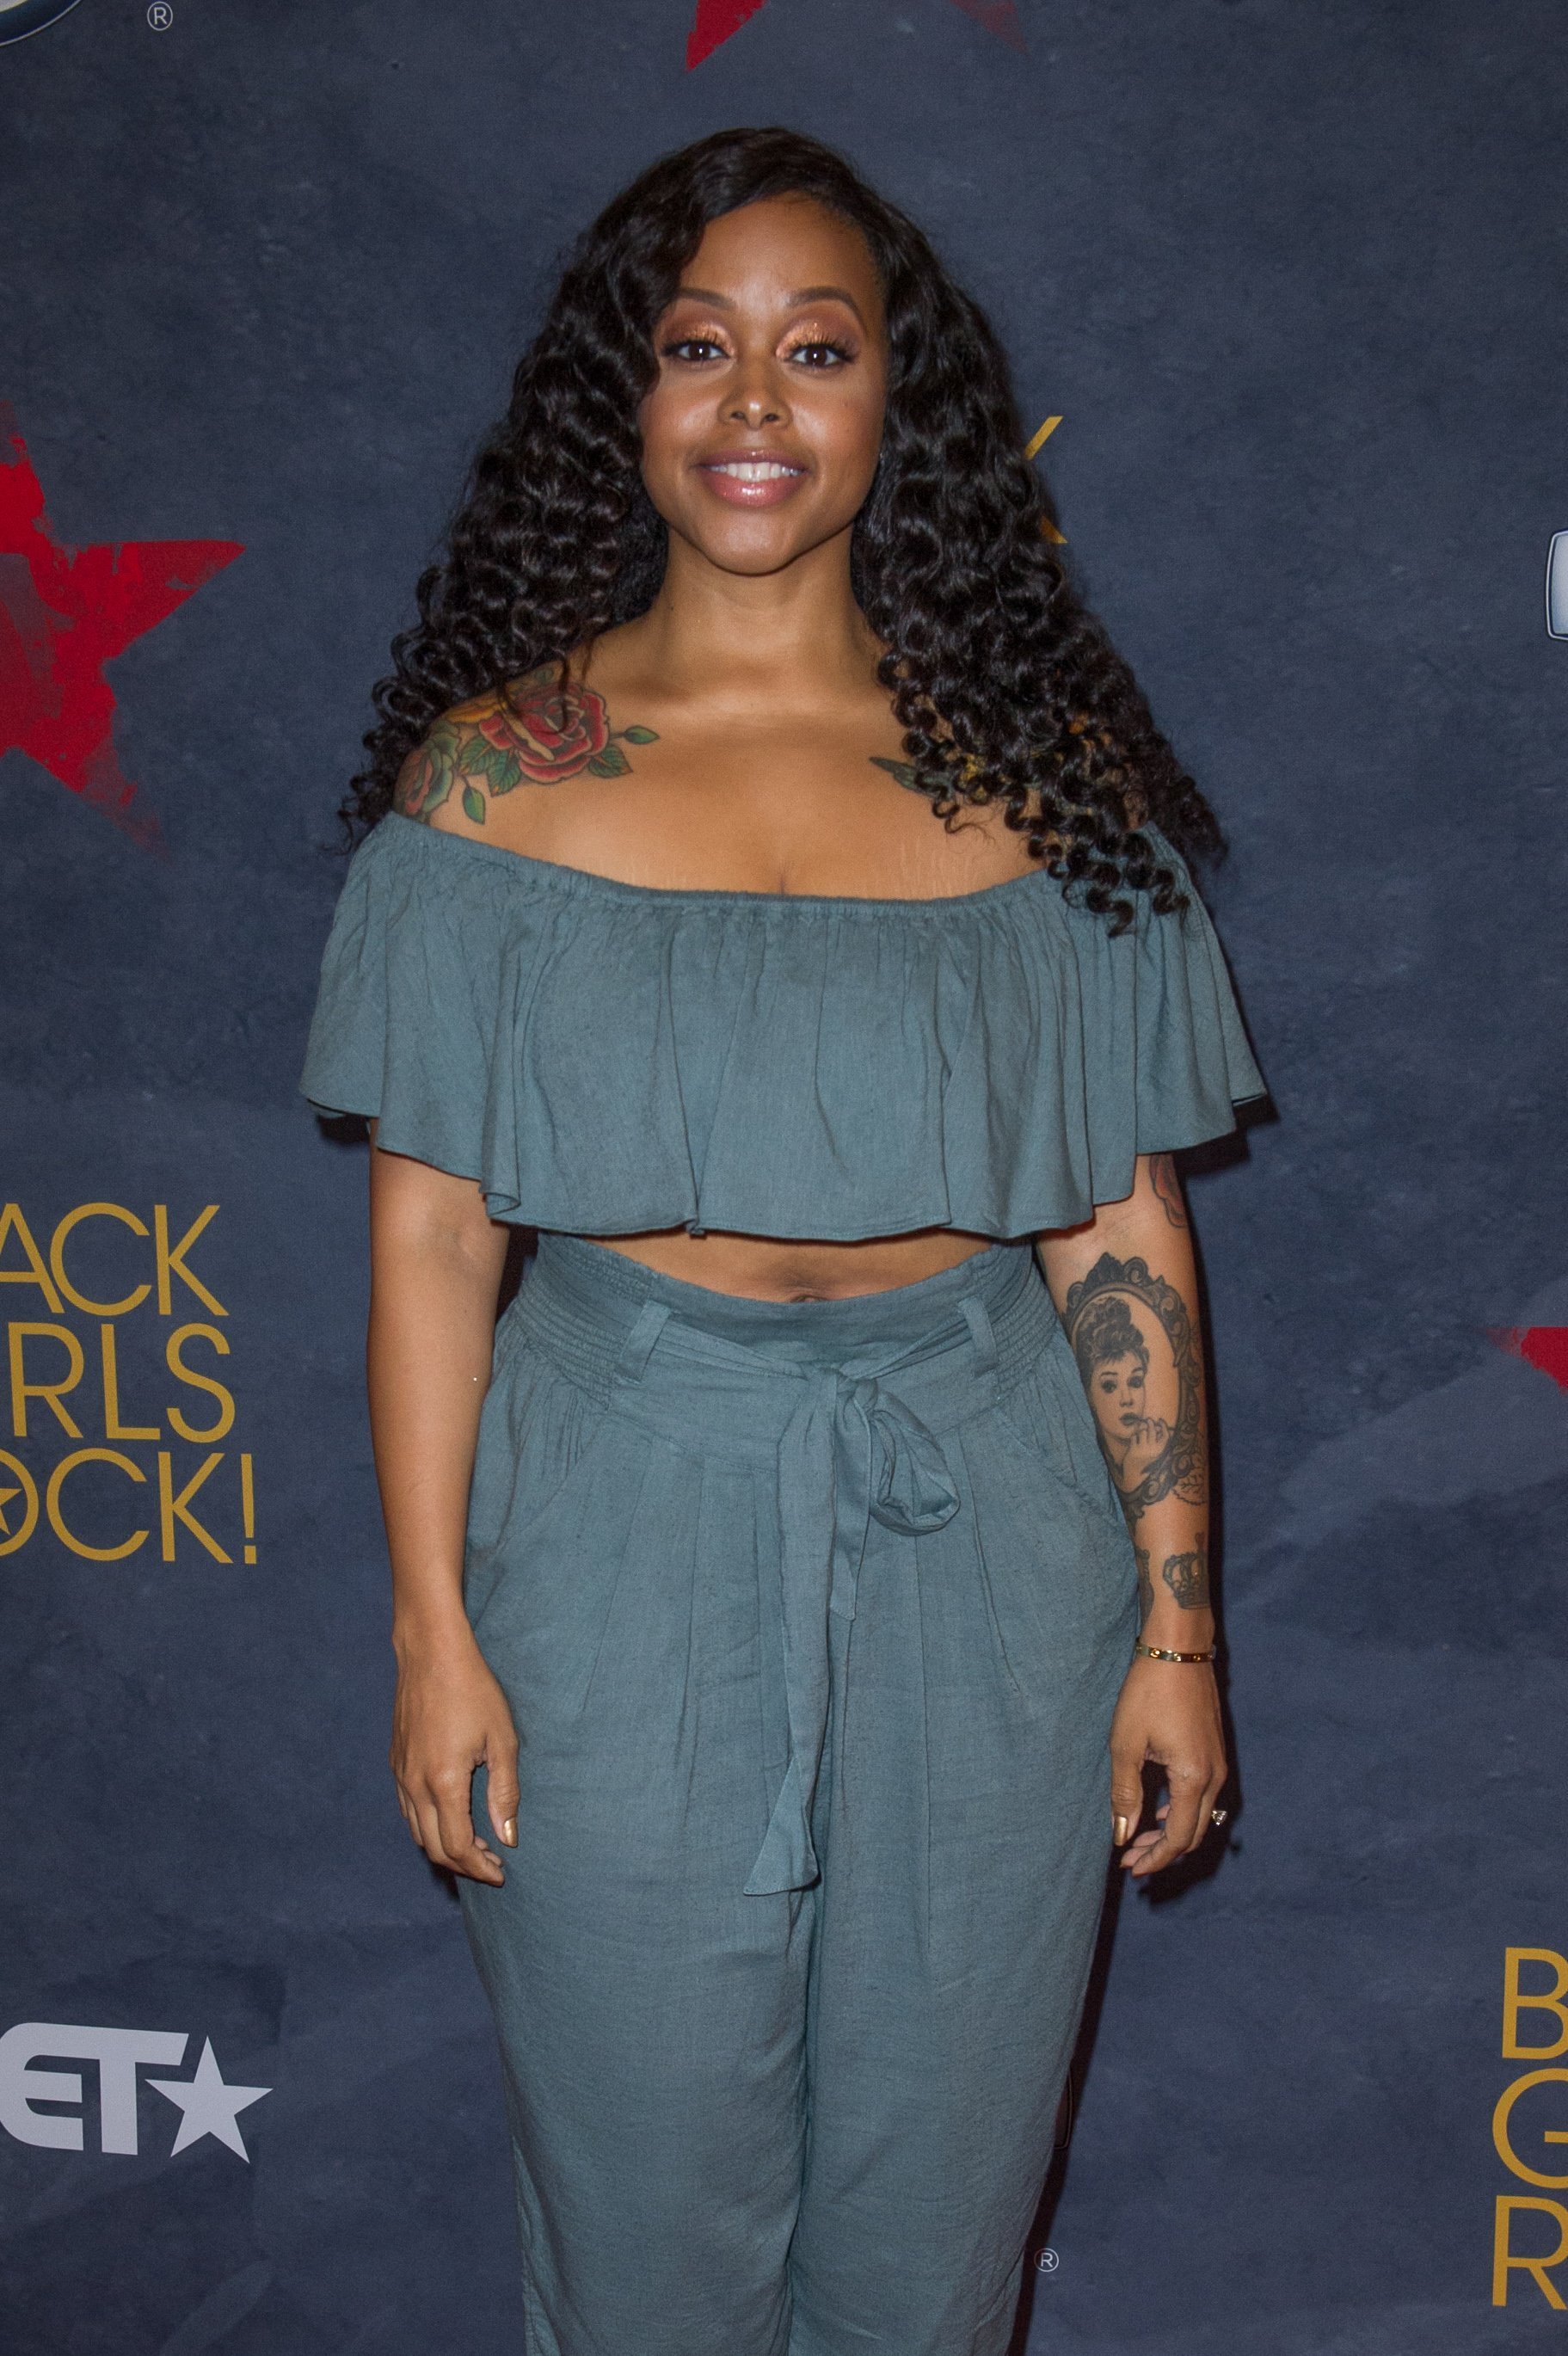 Chrisette Michele attends Black Girls Rock at New Jersey Performing Arts Center on August 5, 2017. | Photo: GettyImages/Global Images of Ukraine